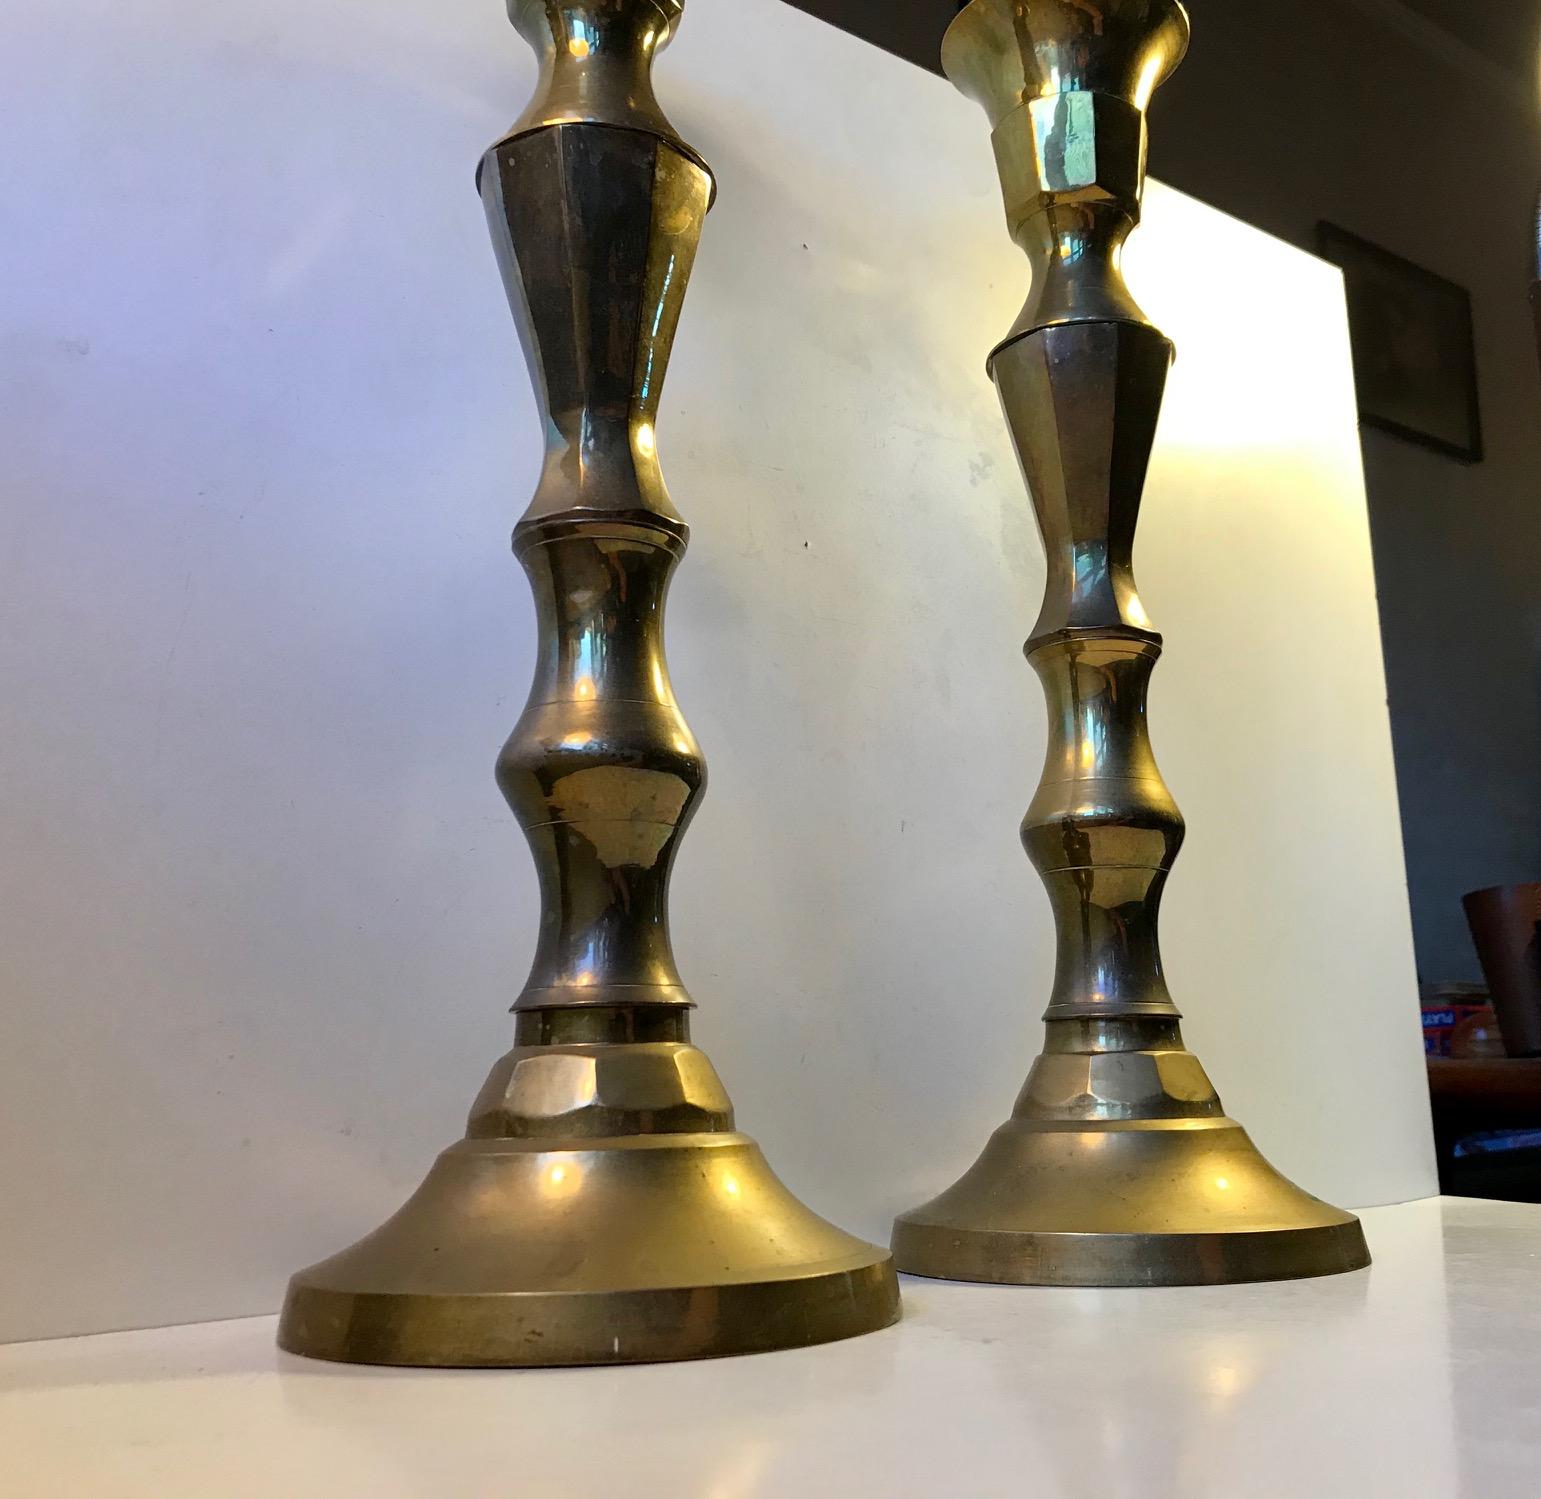 A pair of large church candlesticks in sculpted brass. These came out of a Church near Tjaeborg in the western part of Denmark. The design is very plain and almost has an Art Deco appearance to them. They have not been polished recently and the